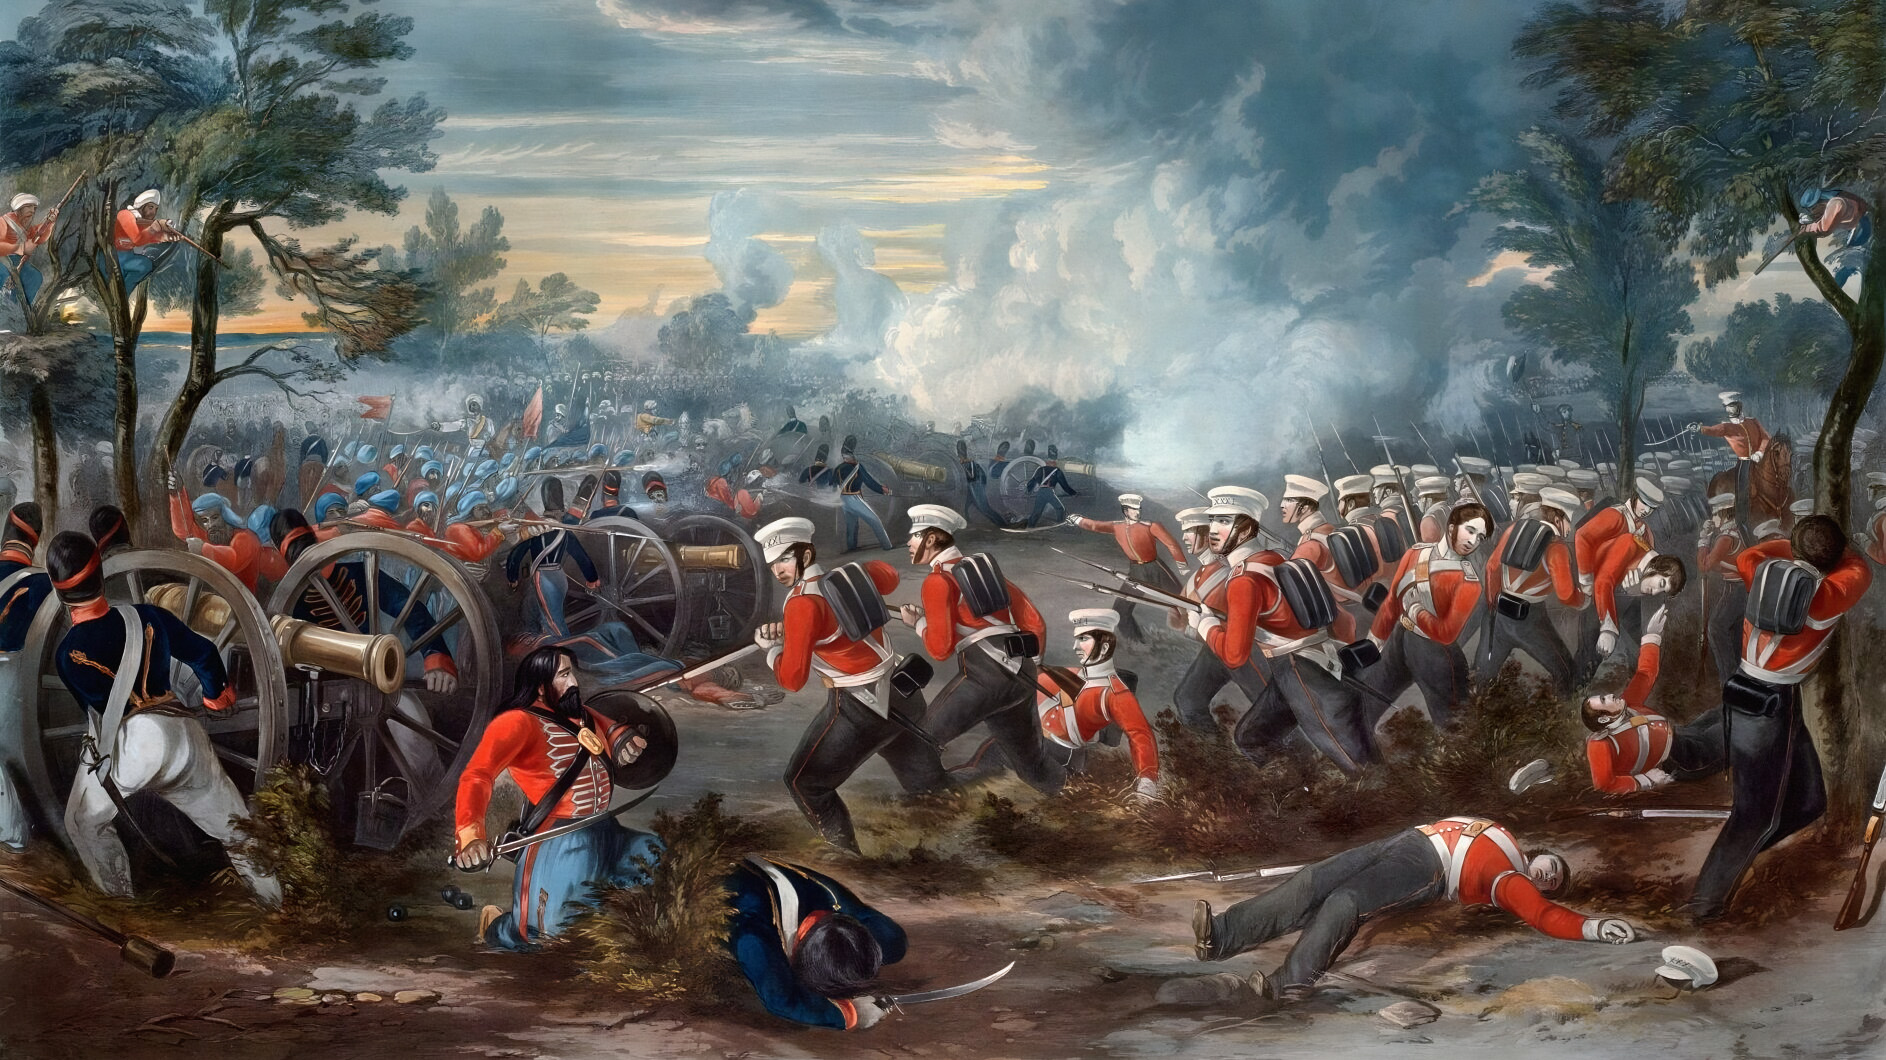 Bayonet-wielding troops in the British 31st Regiment of Foot overwhelm Sikh artillerists at Mukdi, the opening battle of the bloody First Sikh War between Great Britain and the Sikh empire.